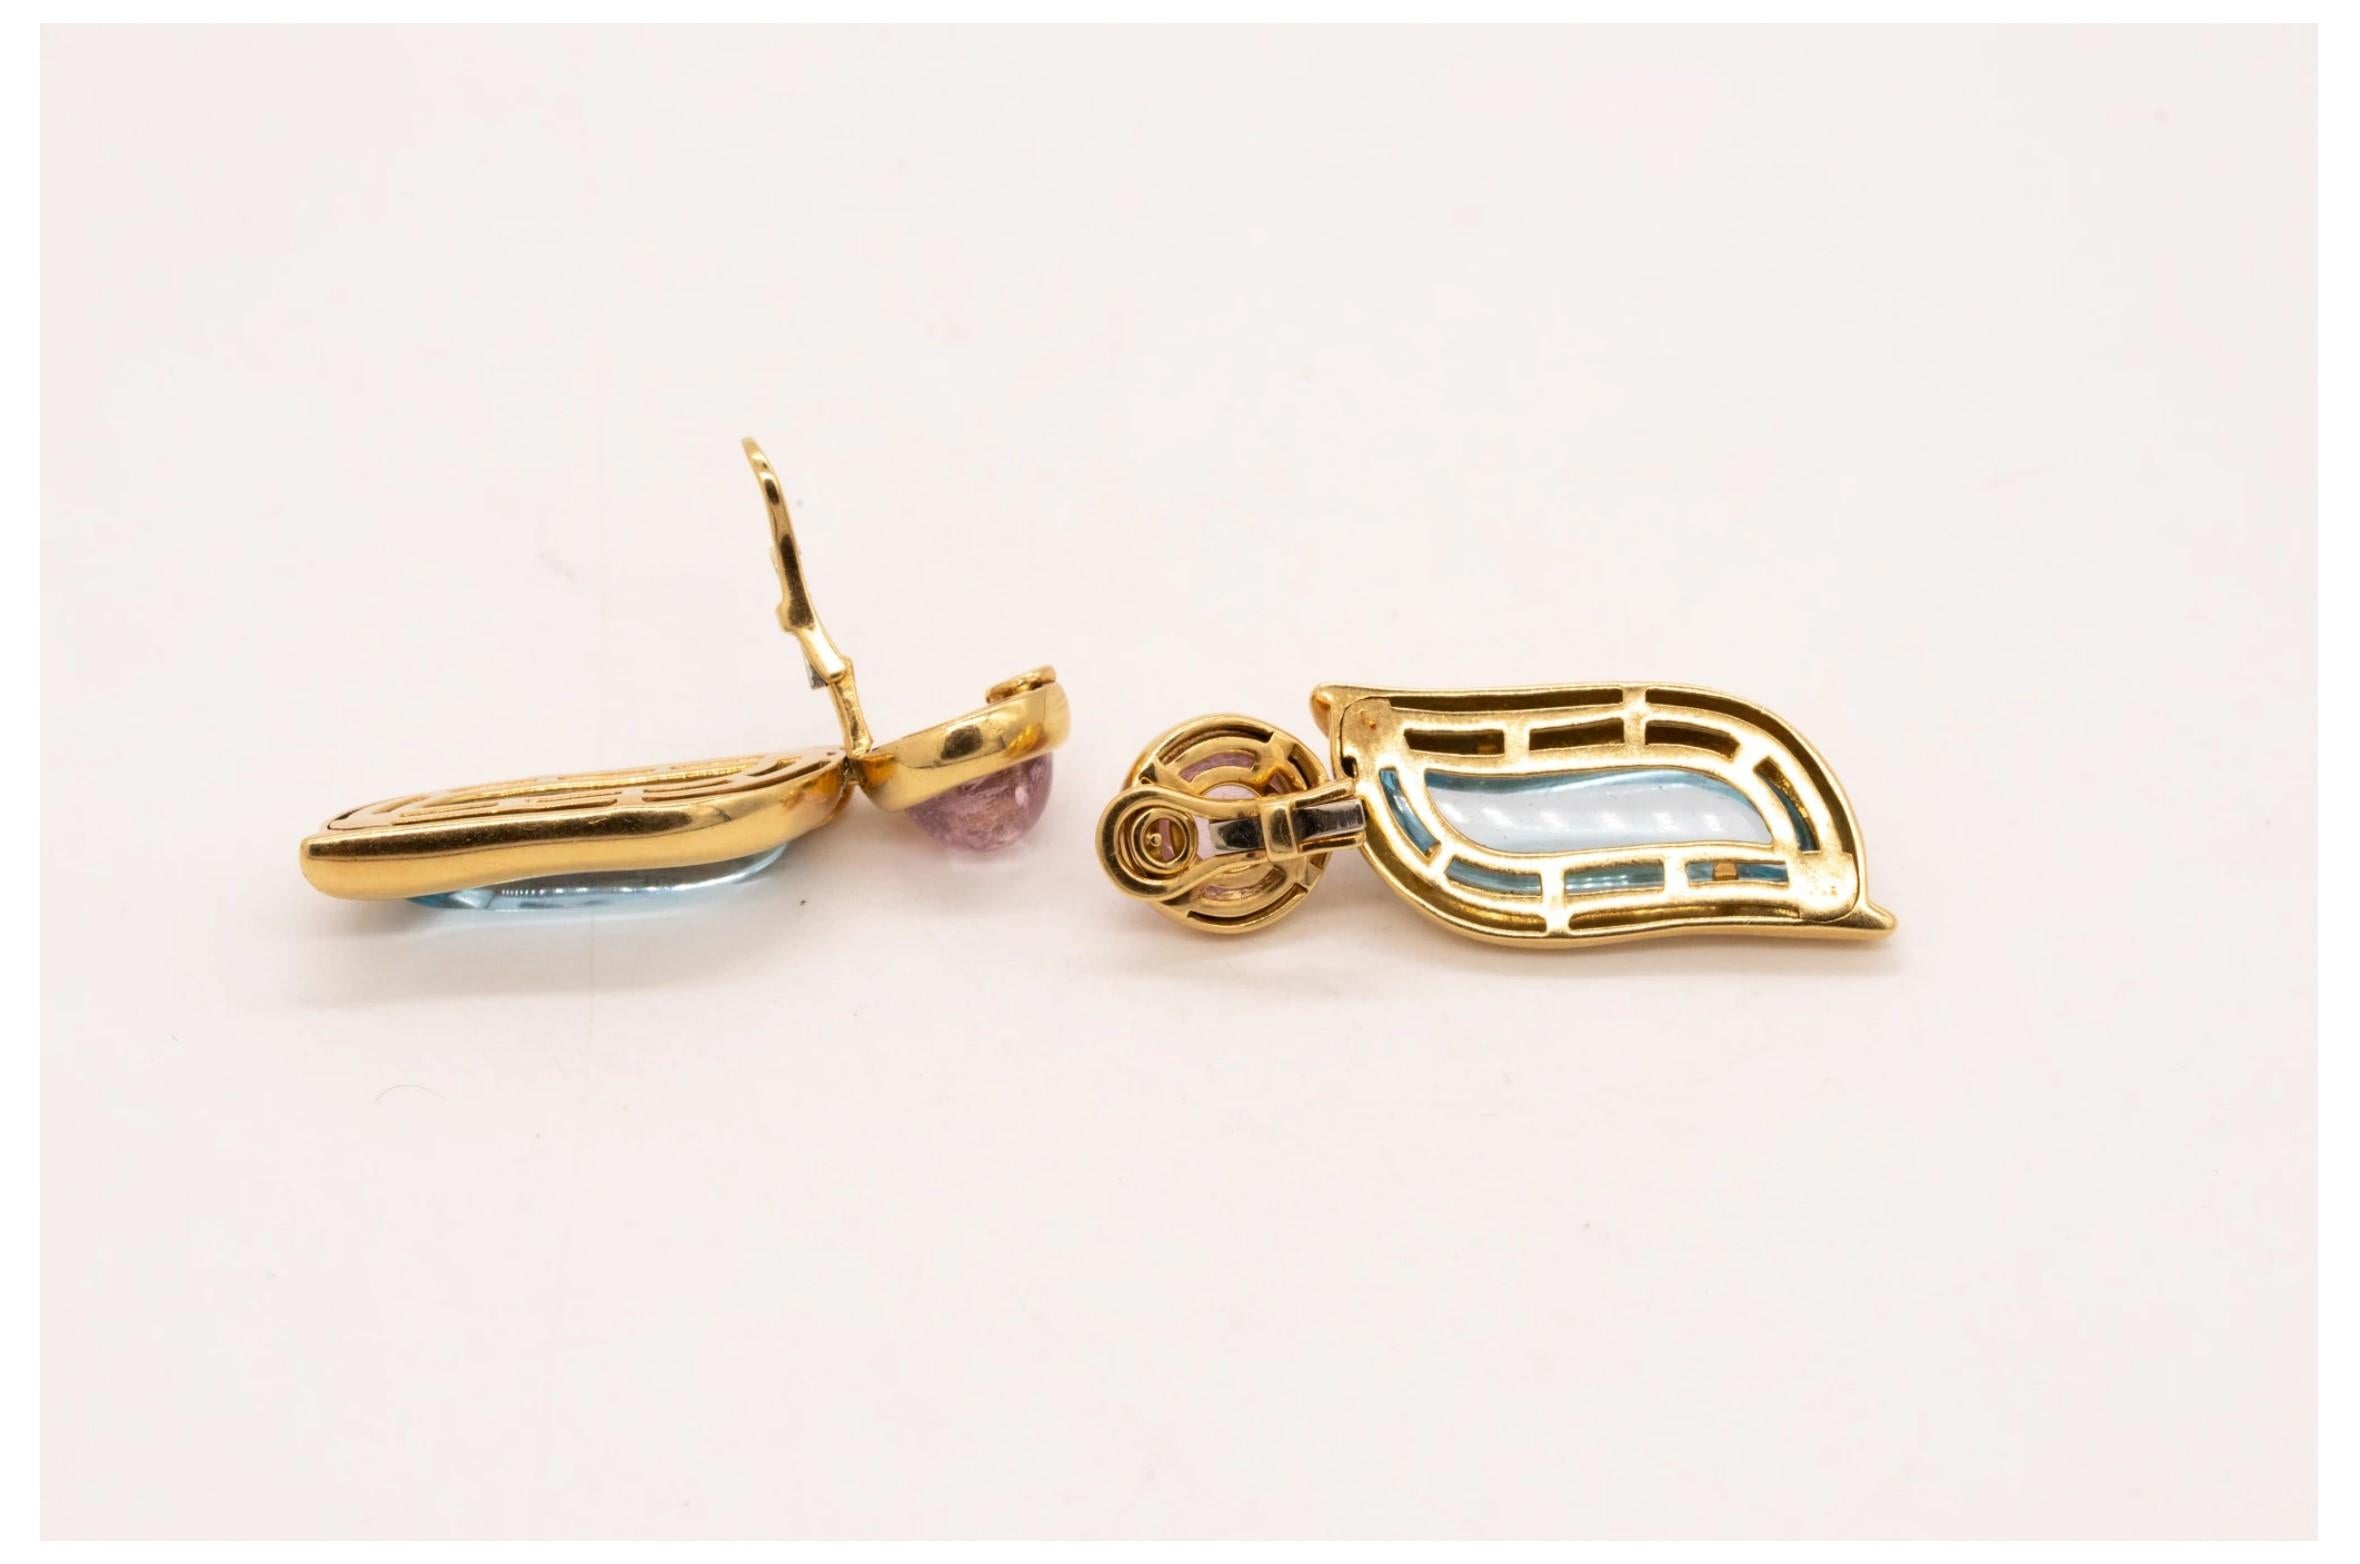 Pair of colorful drop earrings designed by SeidenGang.

Beautiful modern long pair, made by the jewelry designer's SeidenGang. These colorful earrings was crafted in solid yellow gold of 18 karats, with high polished finish. They are suited with